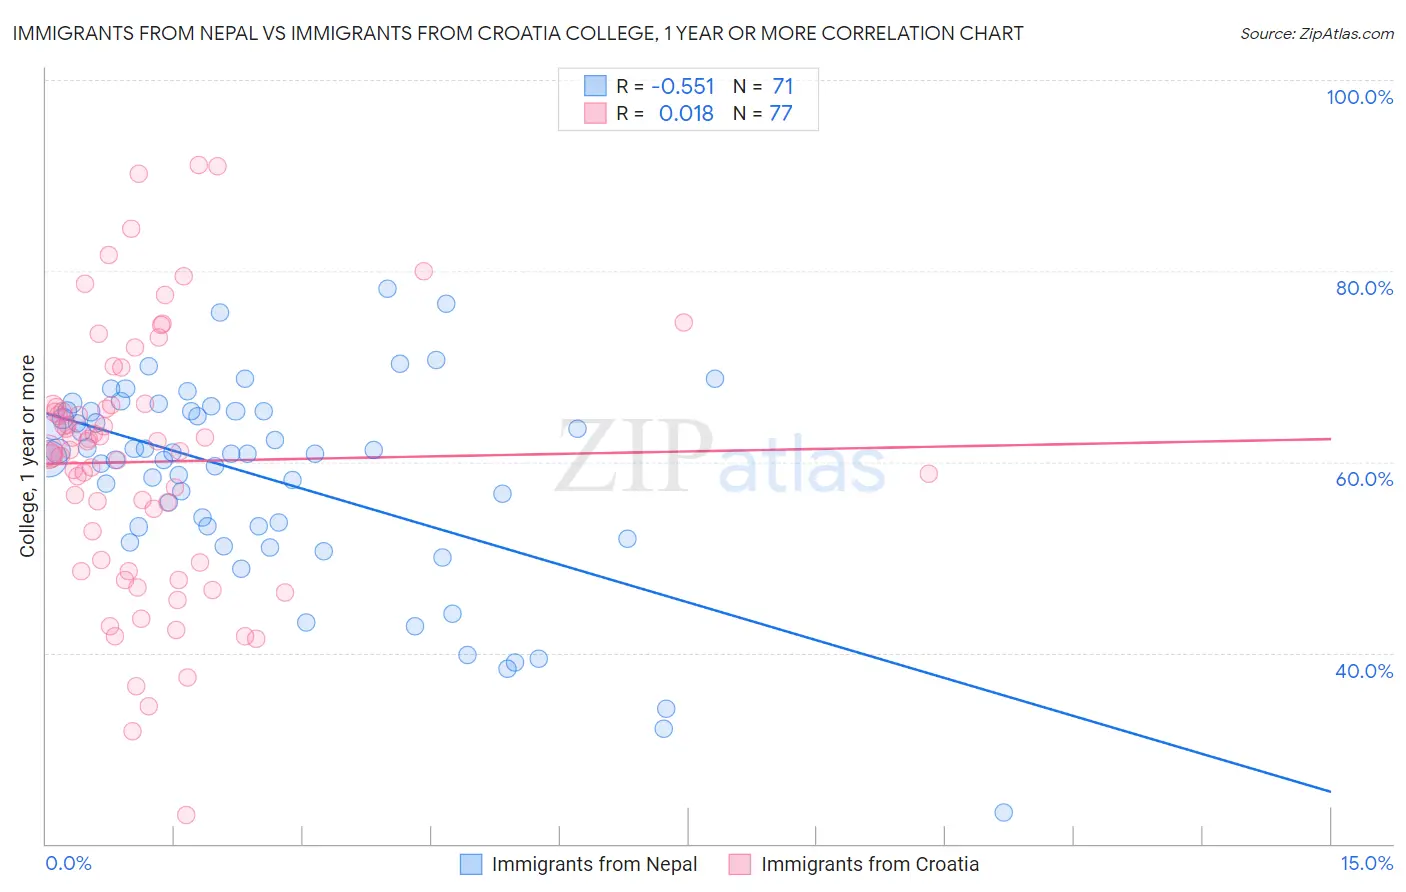 Immigrants from Nepal vs Immigrants from Croatia College, 1 year or more